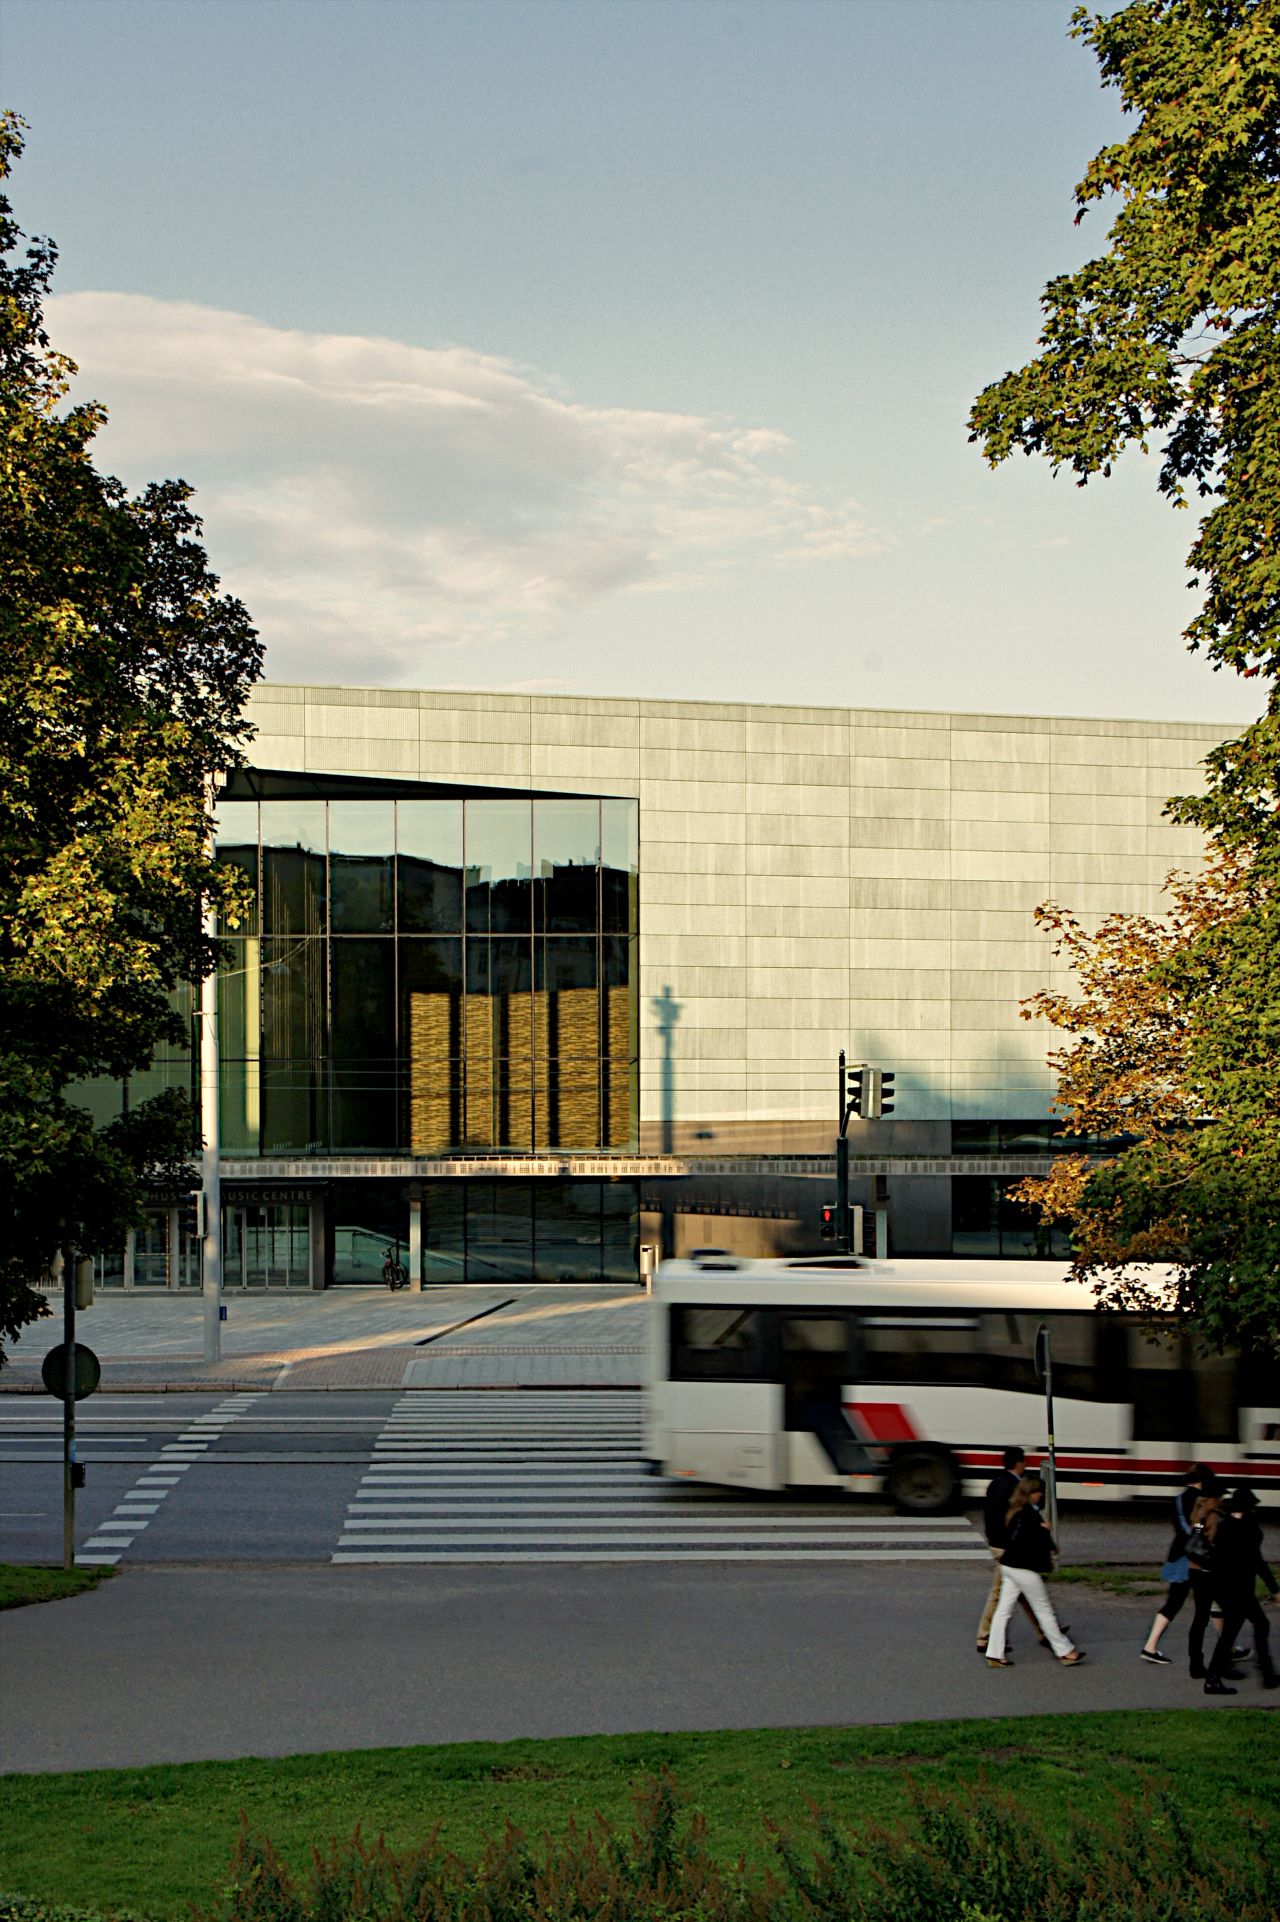 The new concert venue and music academy sits close to three of Helsinki's architectural monuments -- the neoclassical Parliament House, <a href="http://www.finlandiatalo.fi/en/" target="_blank" target="_blank">Finlandia Hall</a> (designed by Alvar Aalto) and <a href="http://www.kiasma.fi/kiasma_en" target="_blank">Kiasma Museum of Contemporary Art</a>.